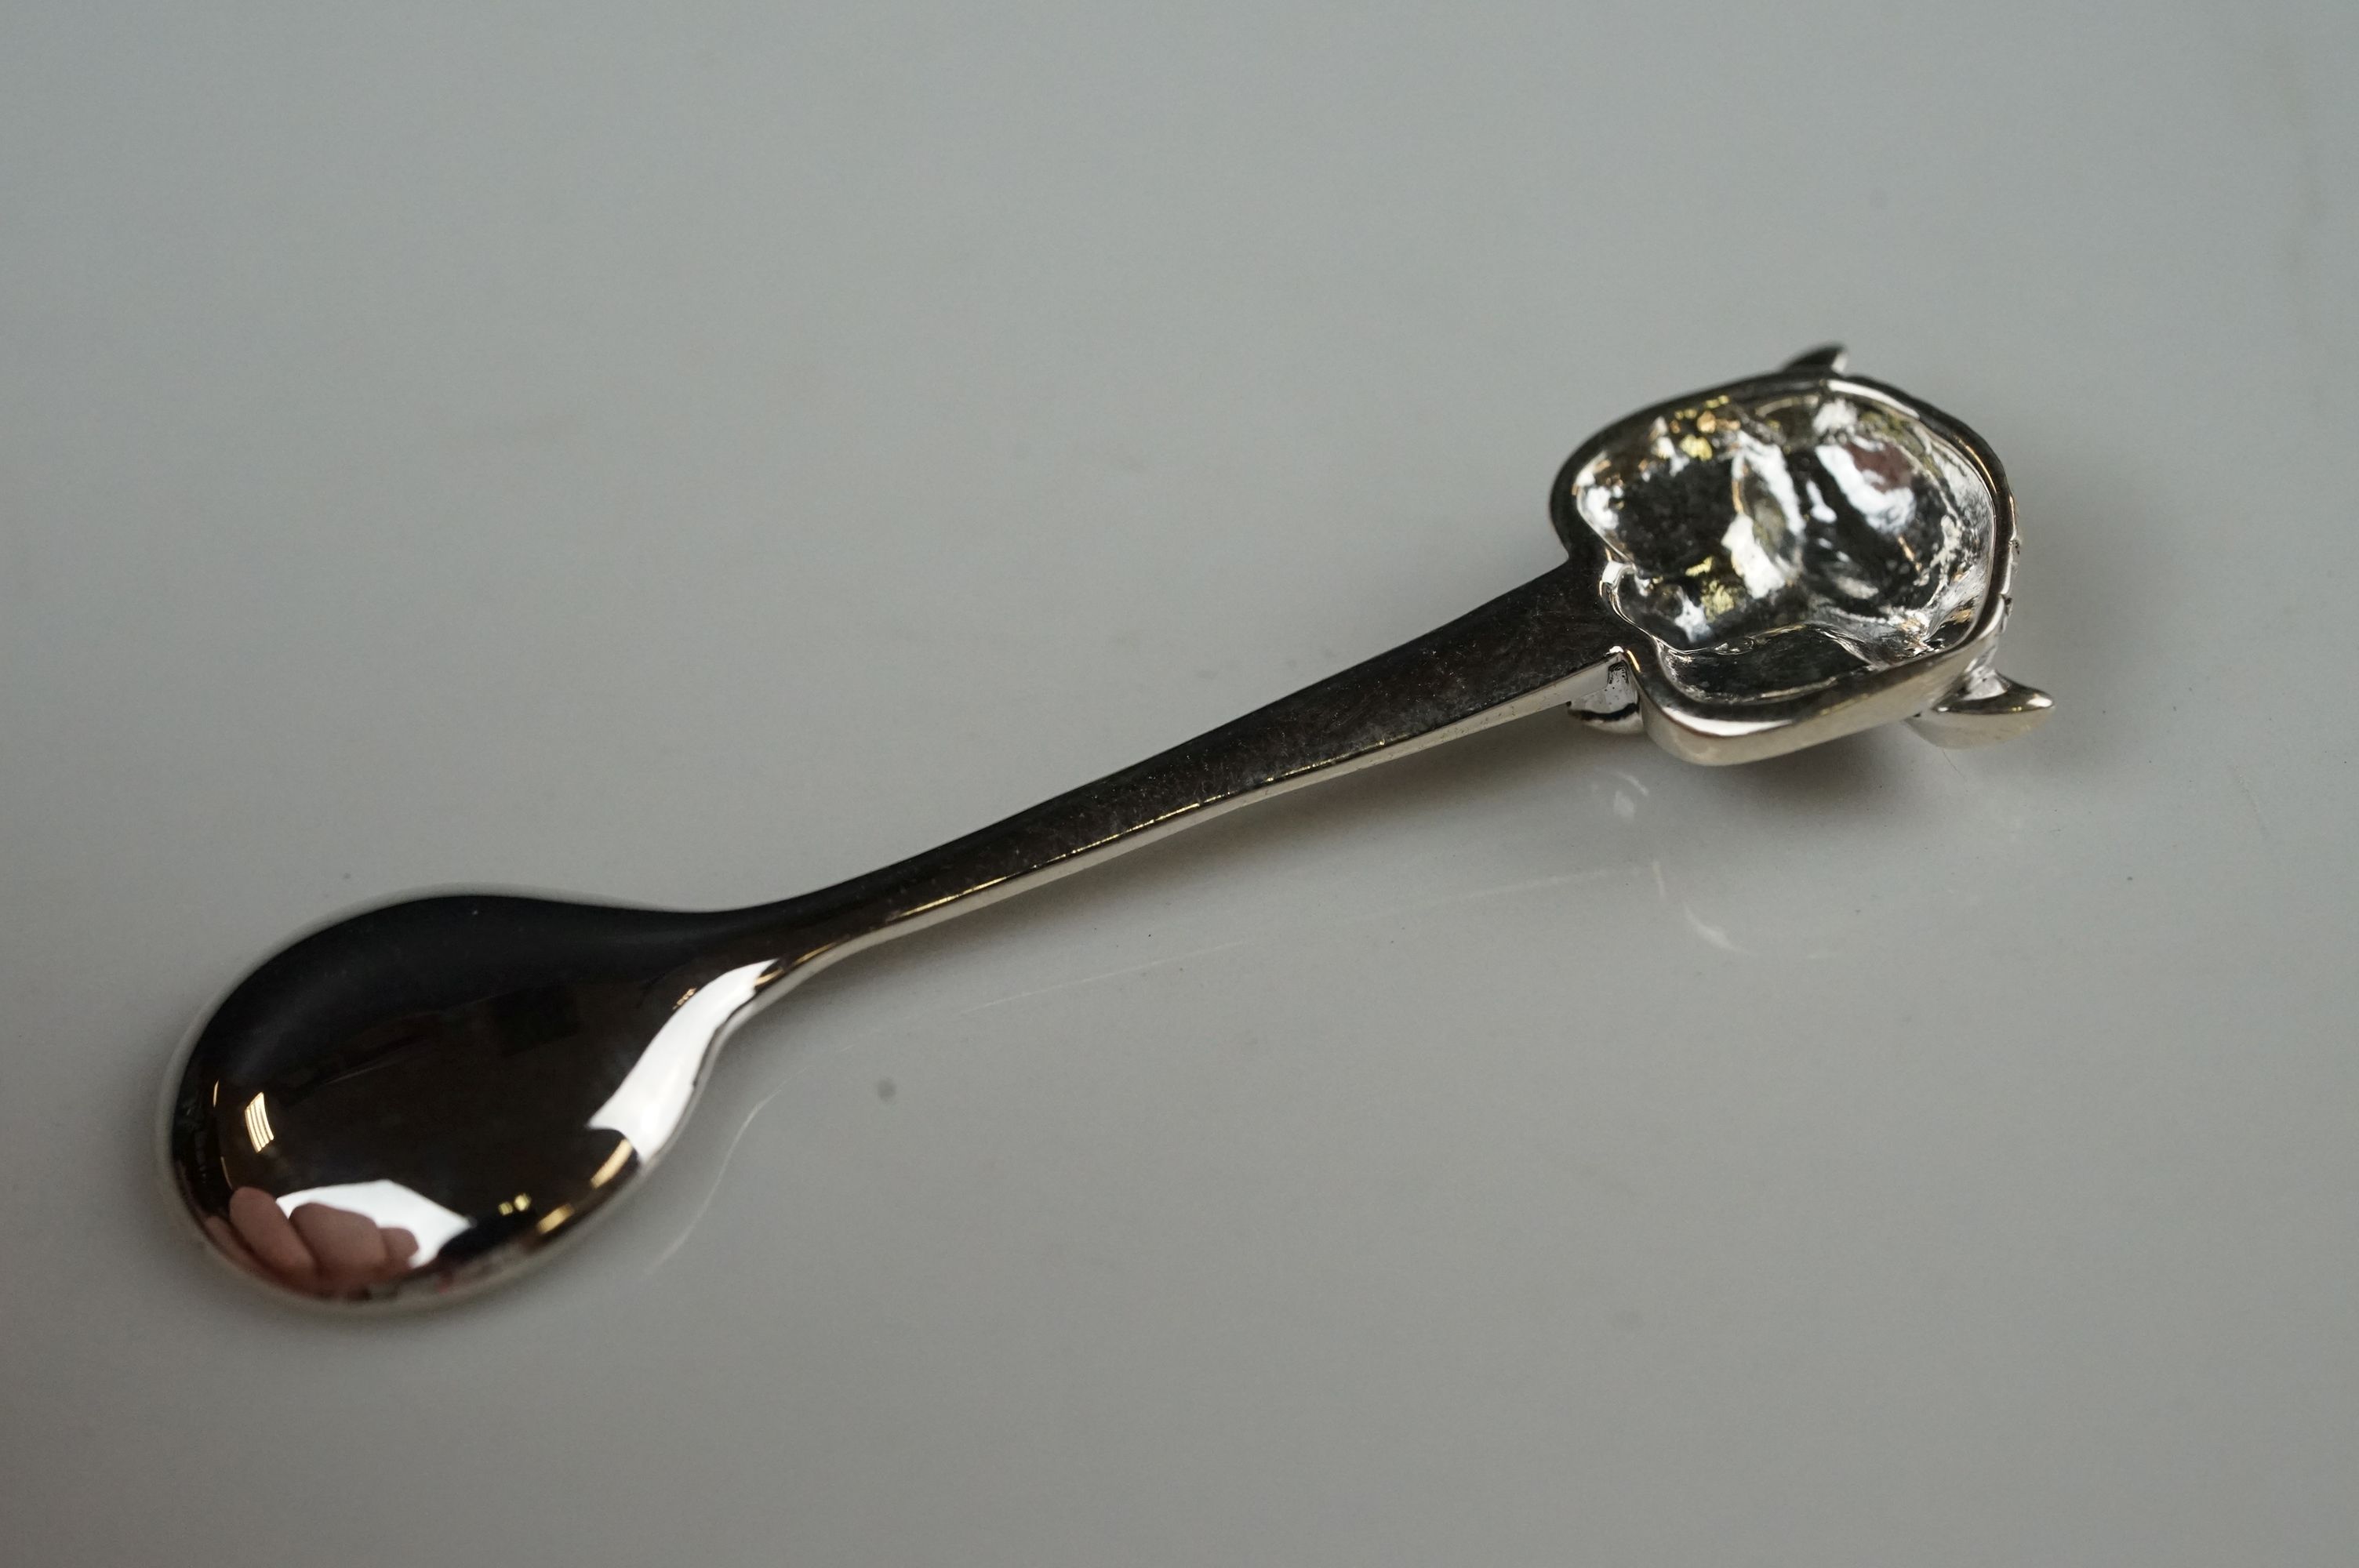 Silver salt spoon with owl finial - Image 4 of 5